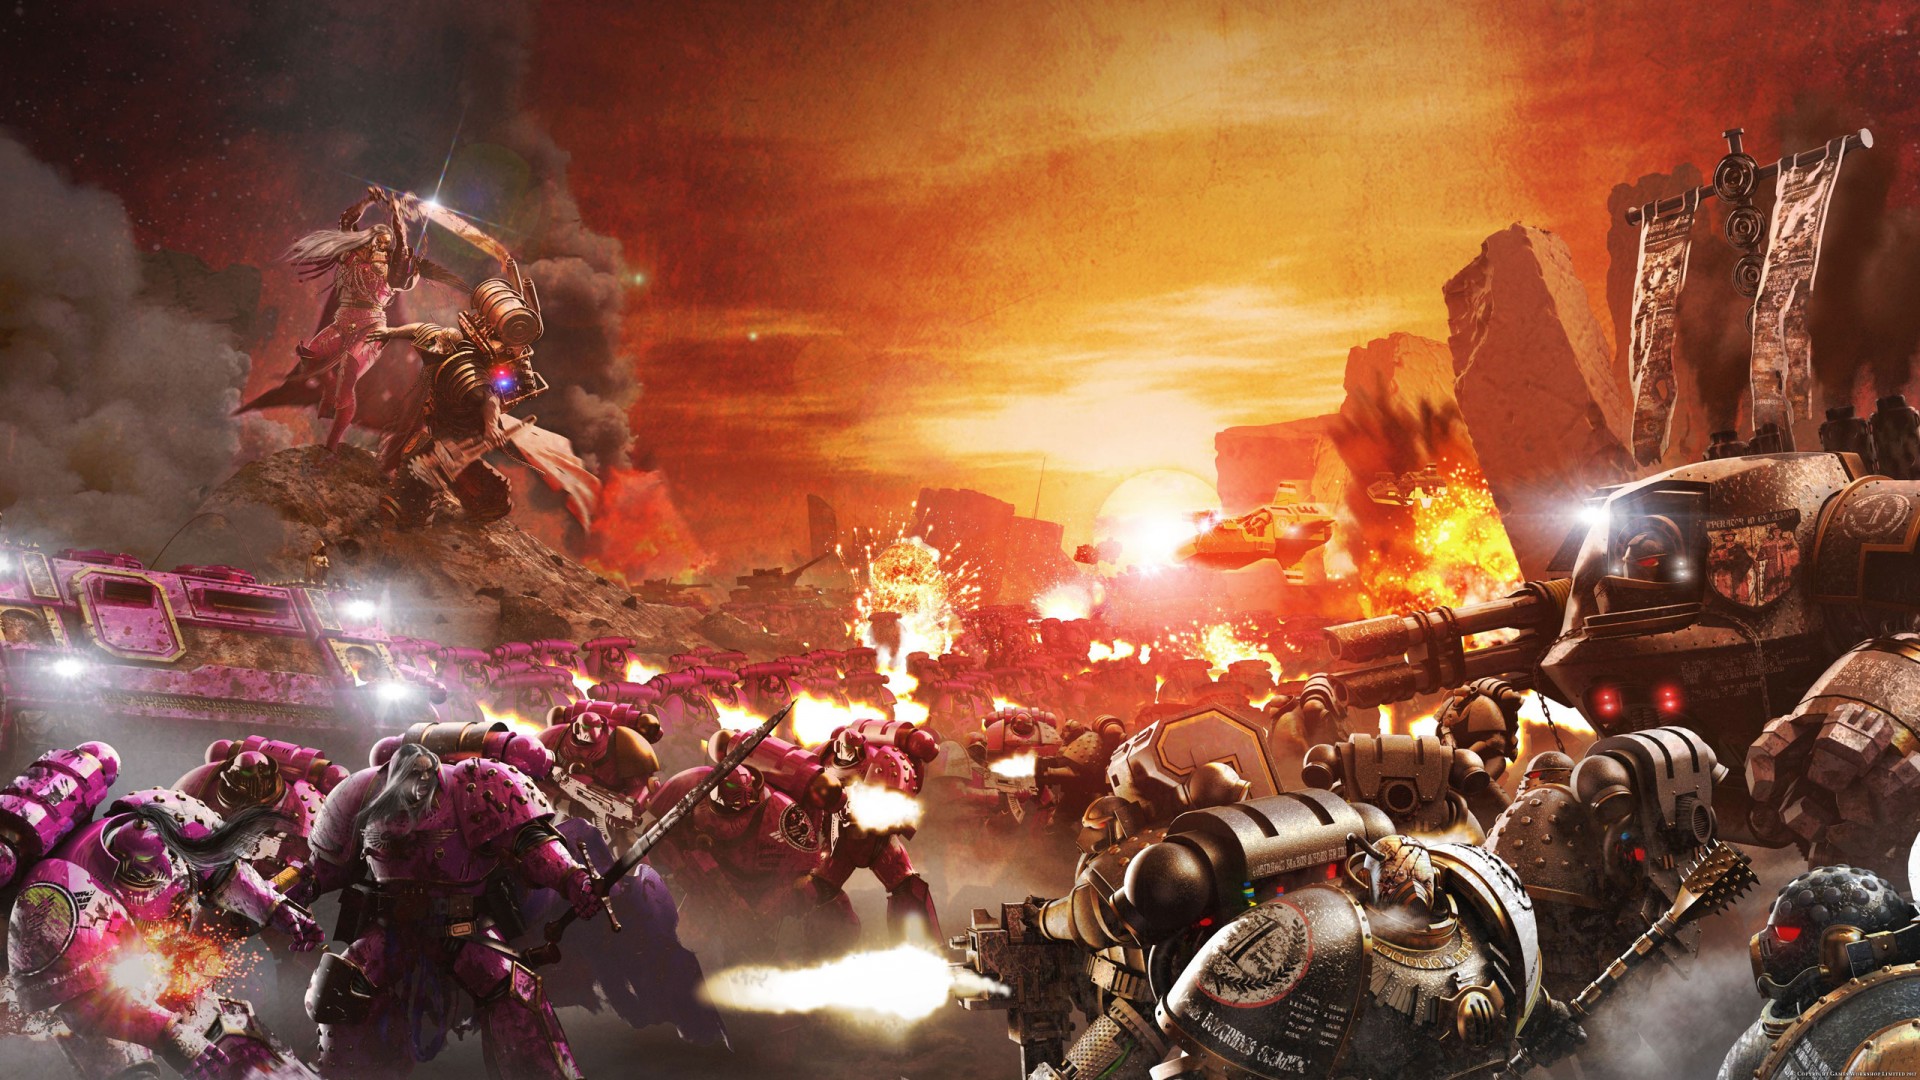 horus heresy wallpaper,action adventure game,strategy video game,pc game,battle,cg artwork